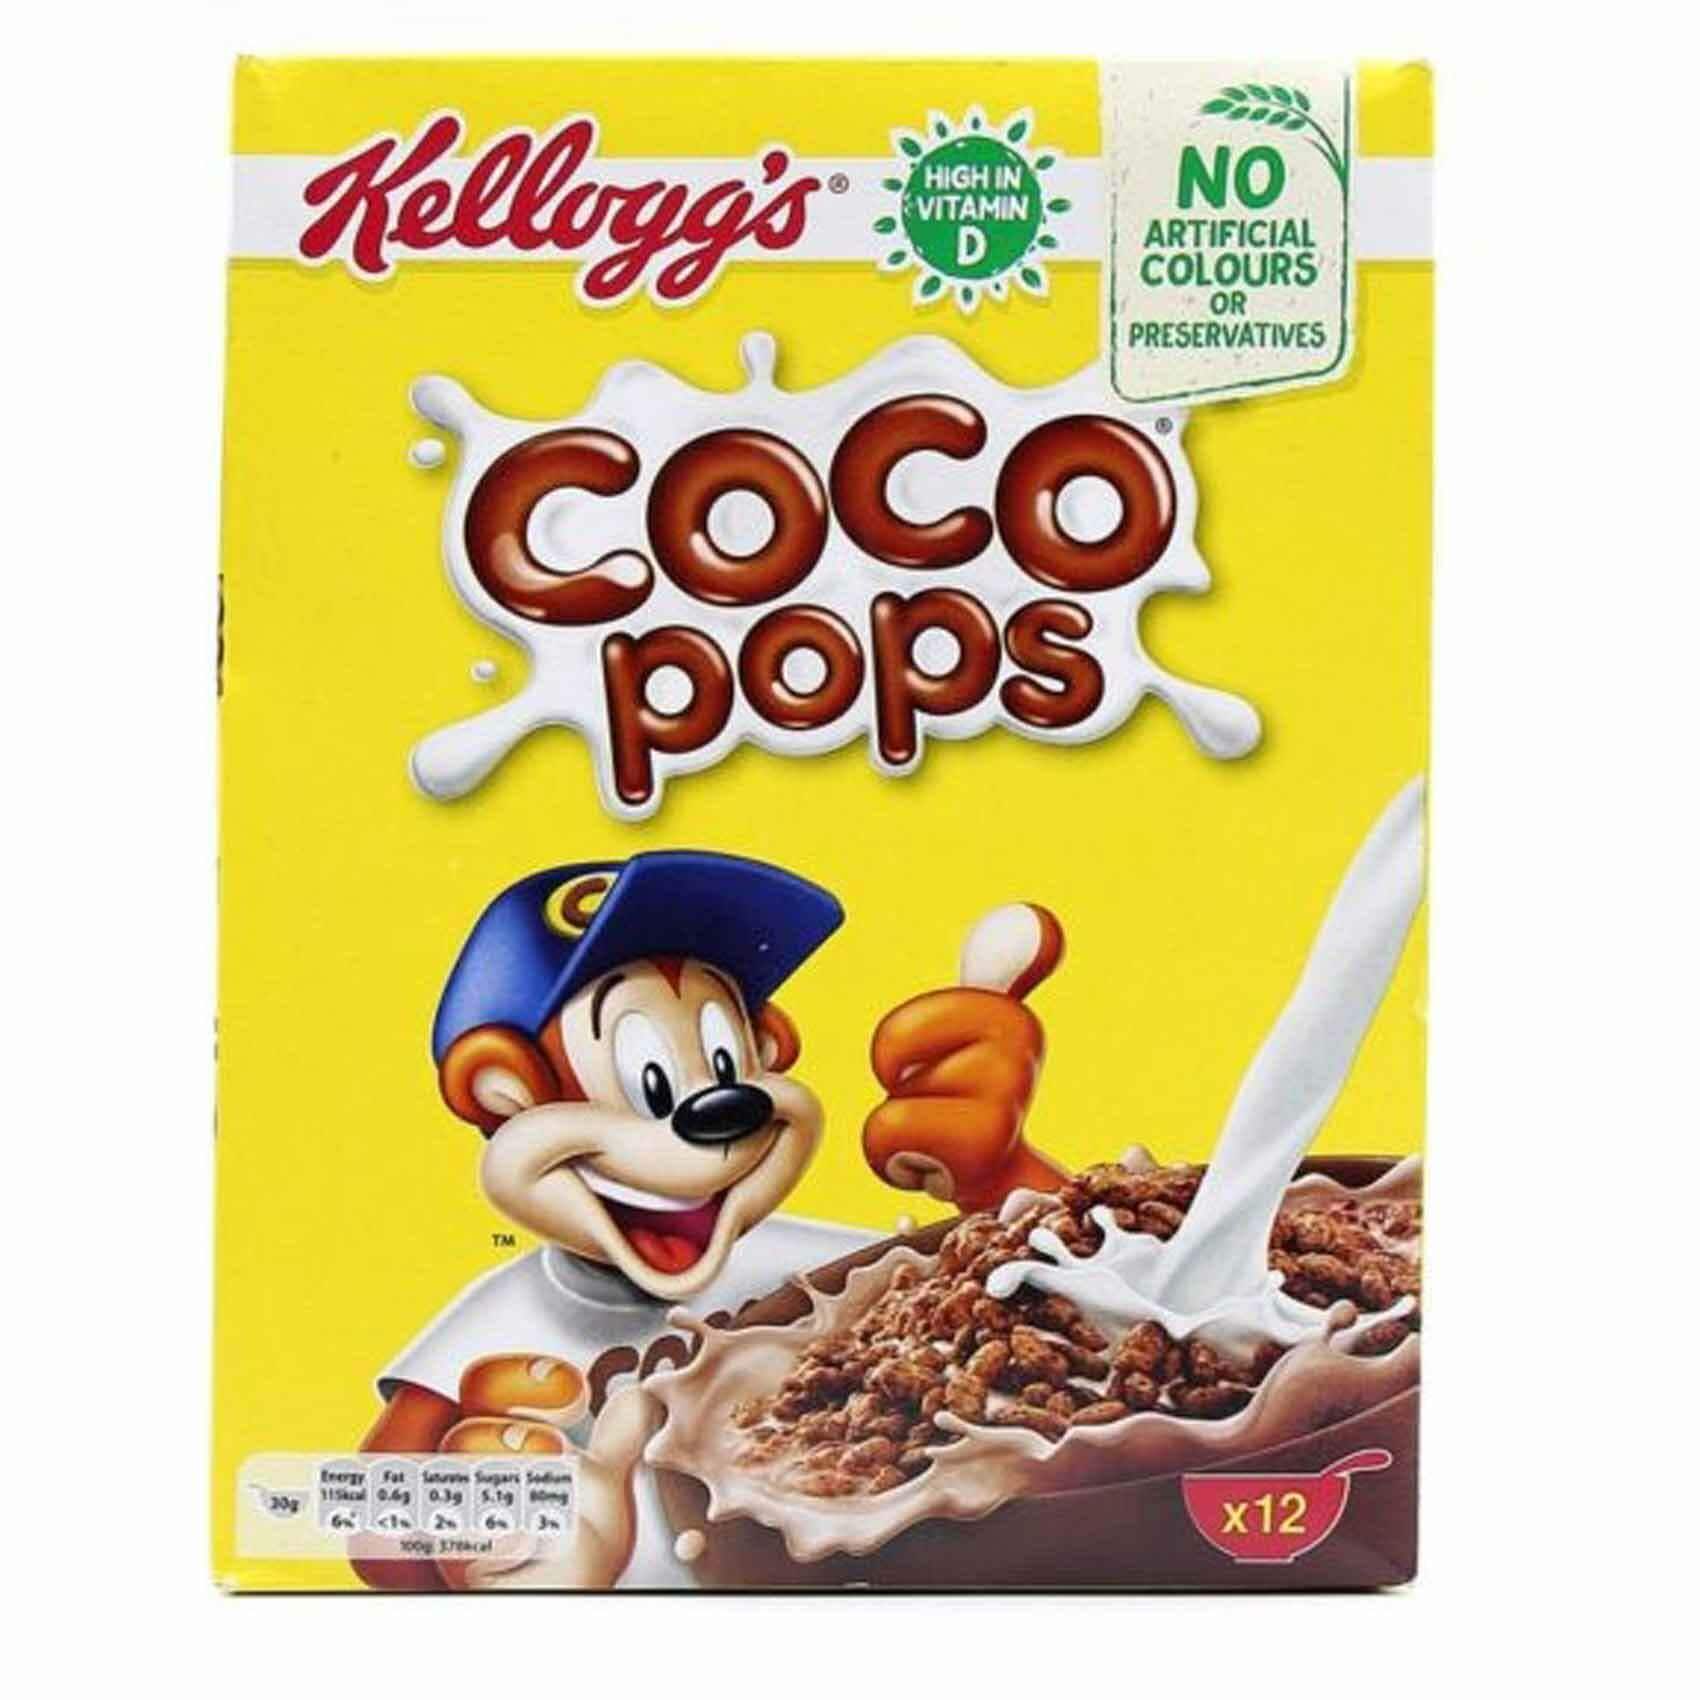 Buy Kellogg's Coco Pops Jumbo Chocolate Maize Cereal 375g Online Shop Food Cupboard on Carrefour UAE